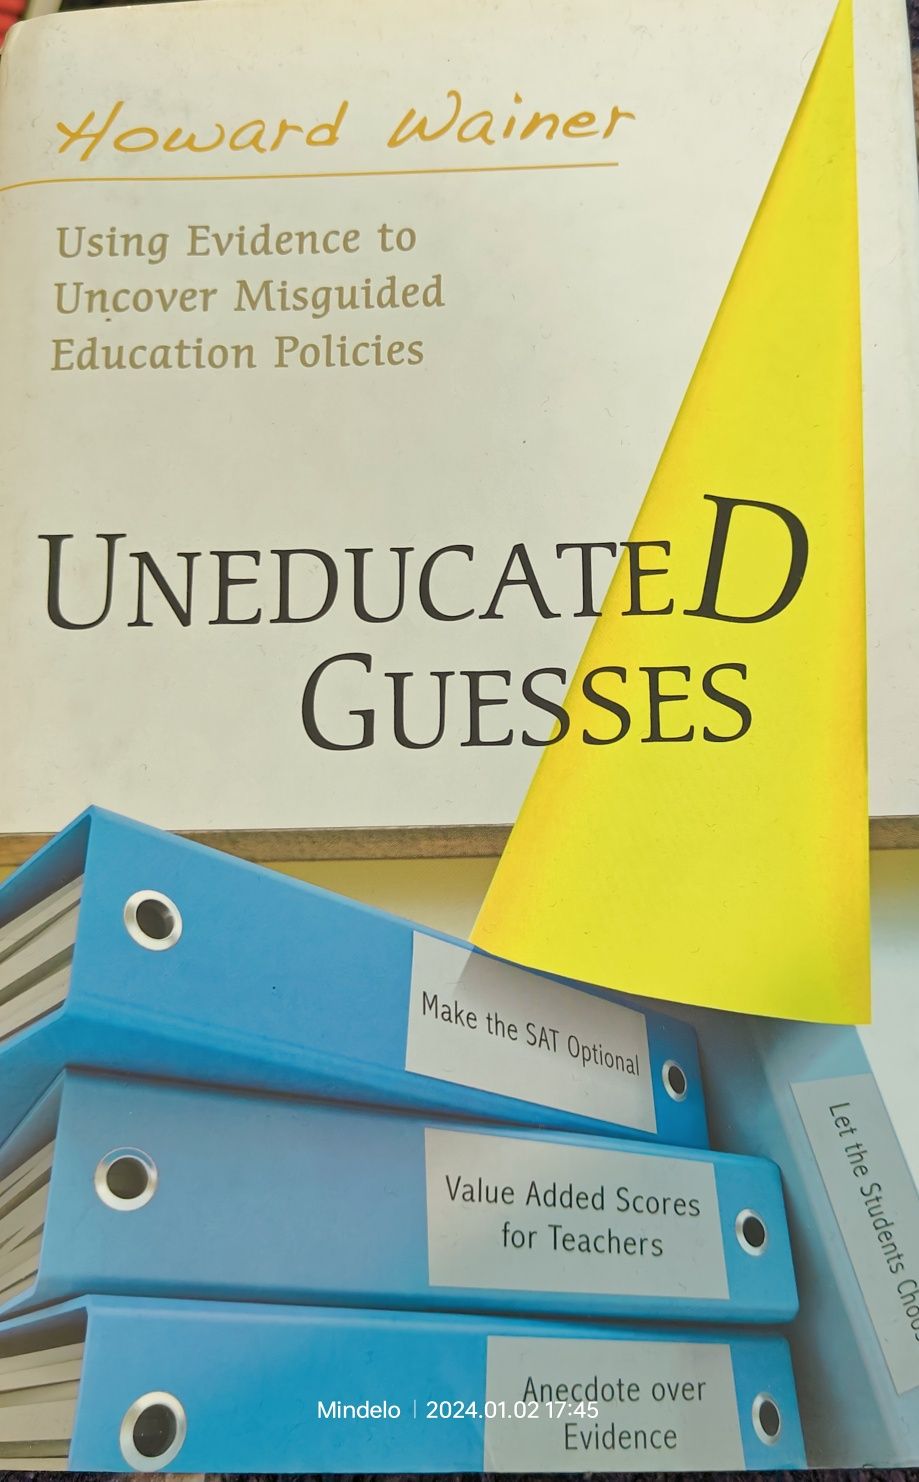 Uneducated Guesses - using evidence to uncover Misguided Policies